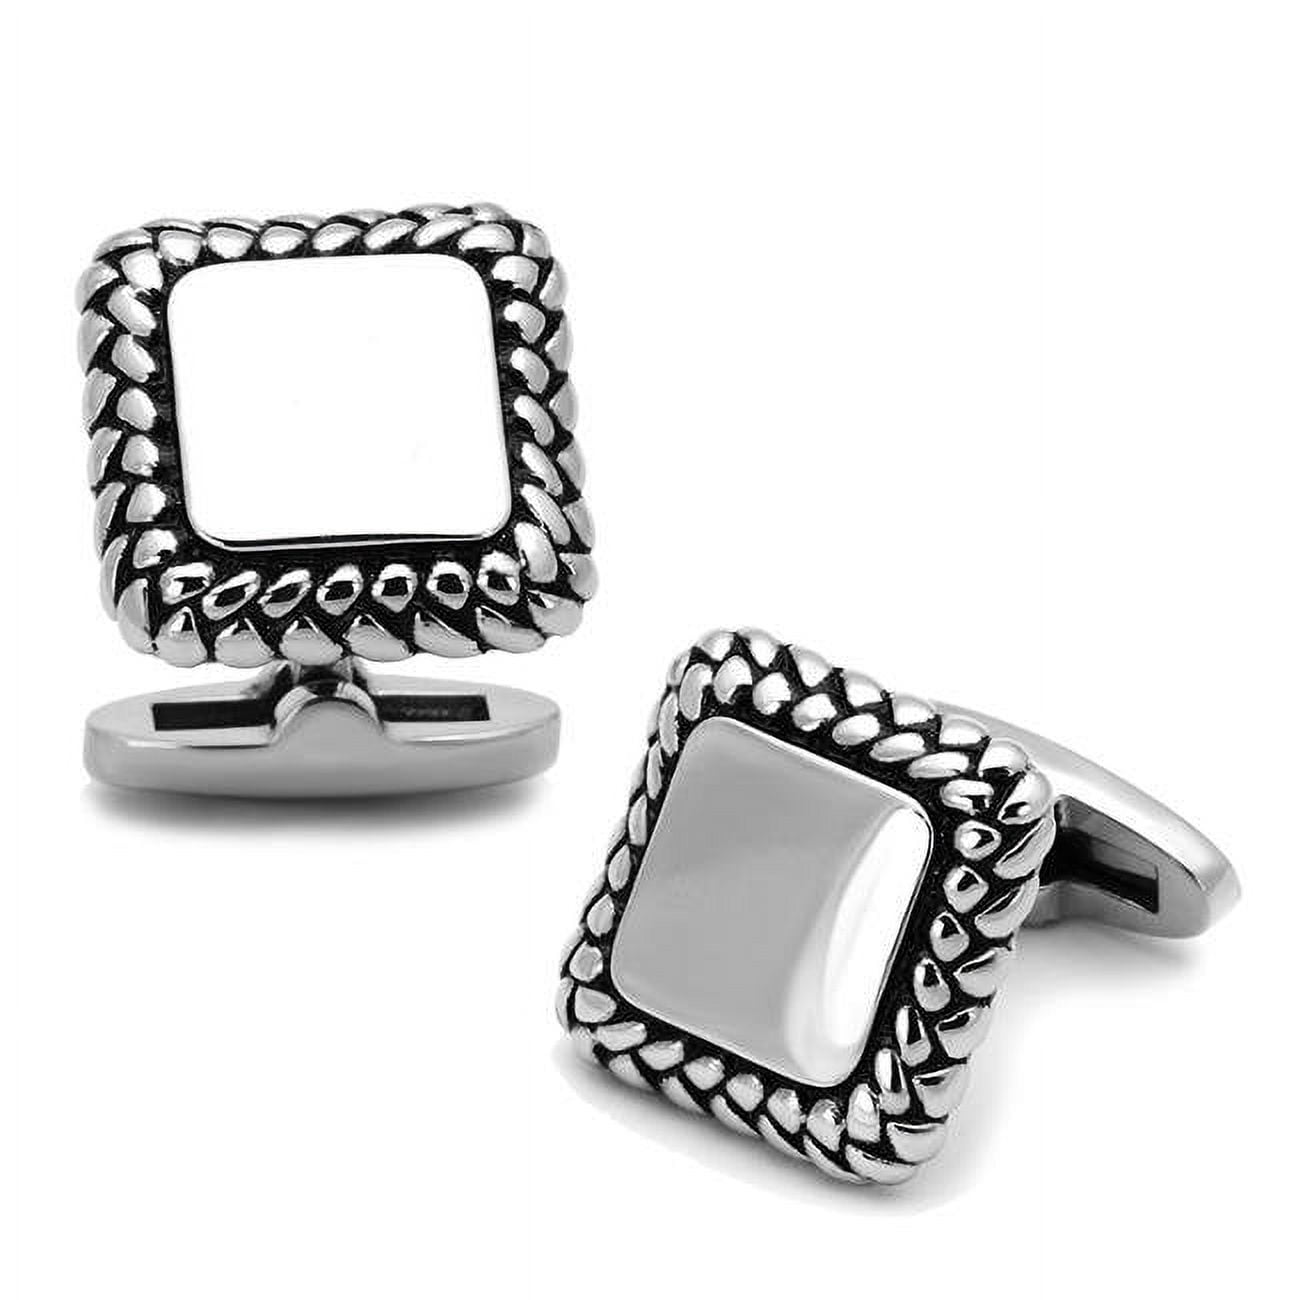 Picture of Alamode TK1246 Men High Polished Stainless Steel Cufflink with Epoxy in Jet